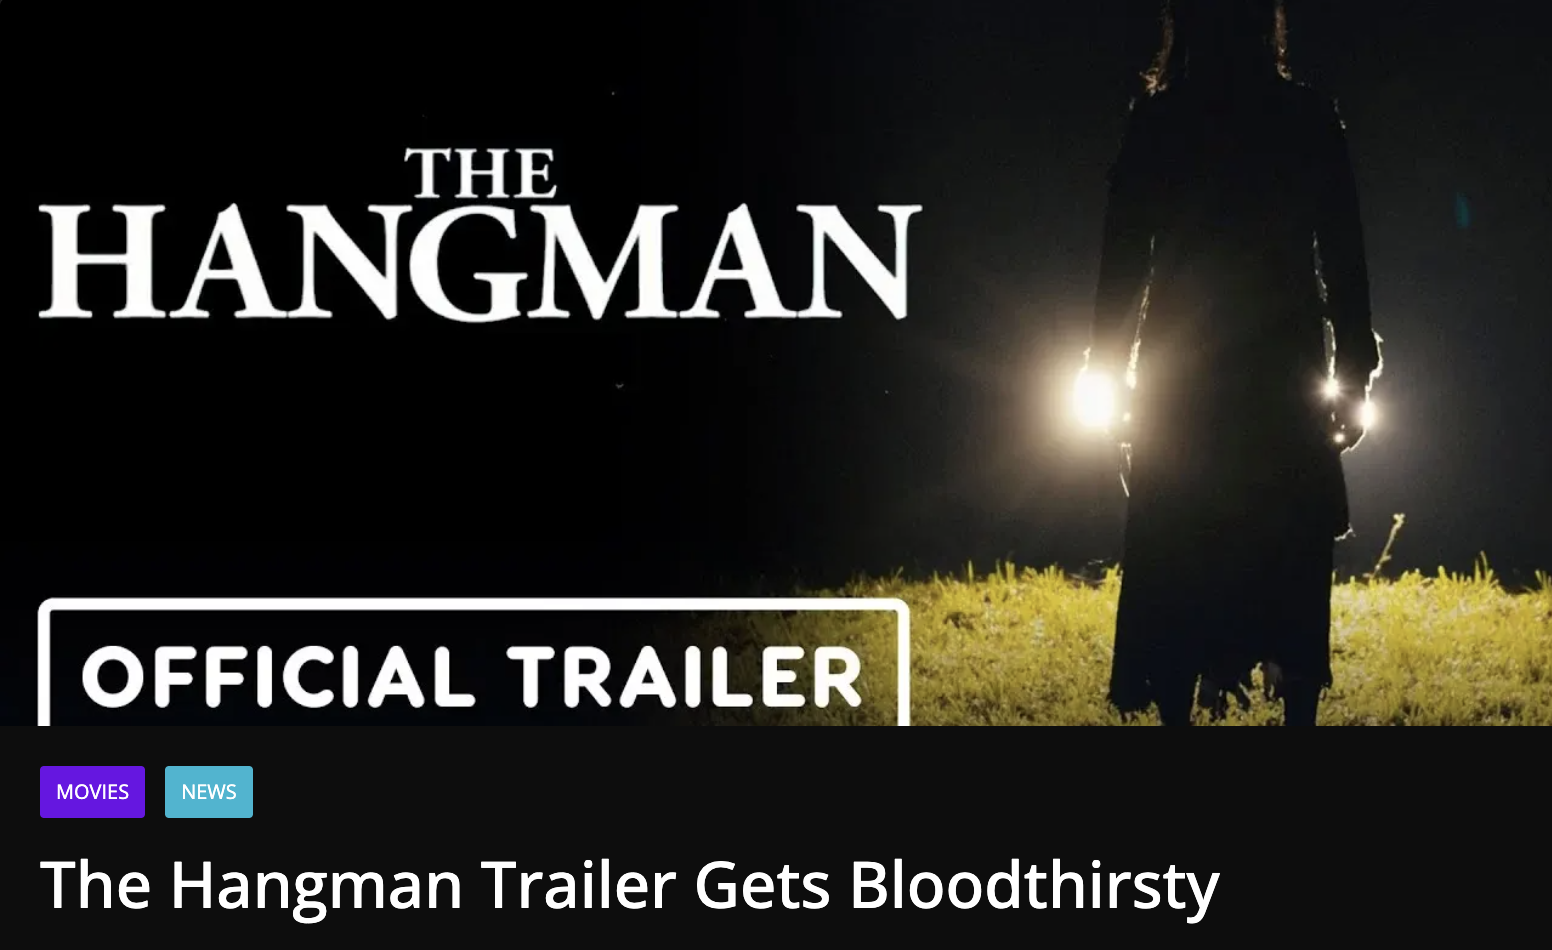 The Hangman Trailer Gets Bloodthirsty